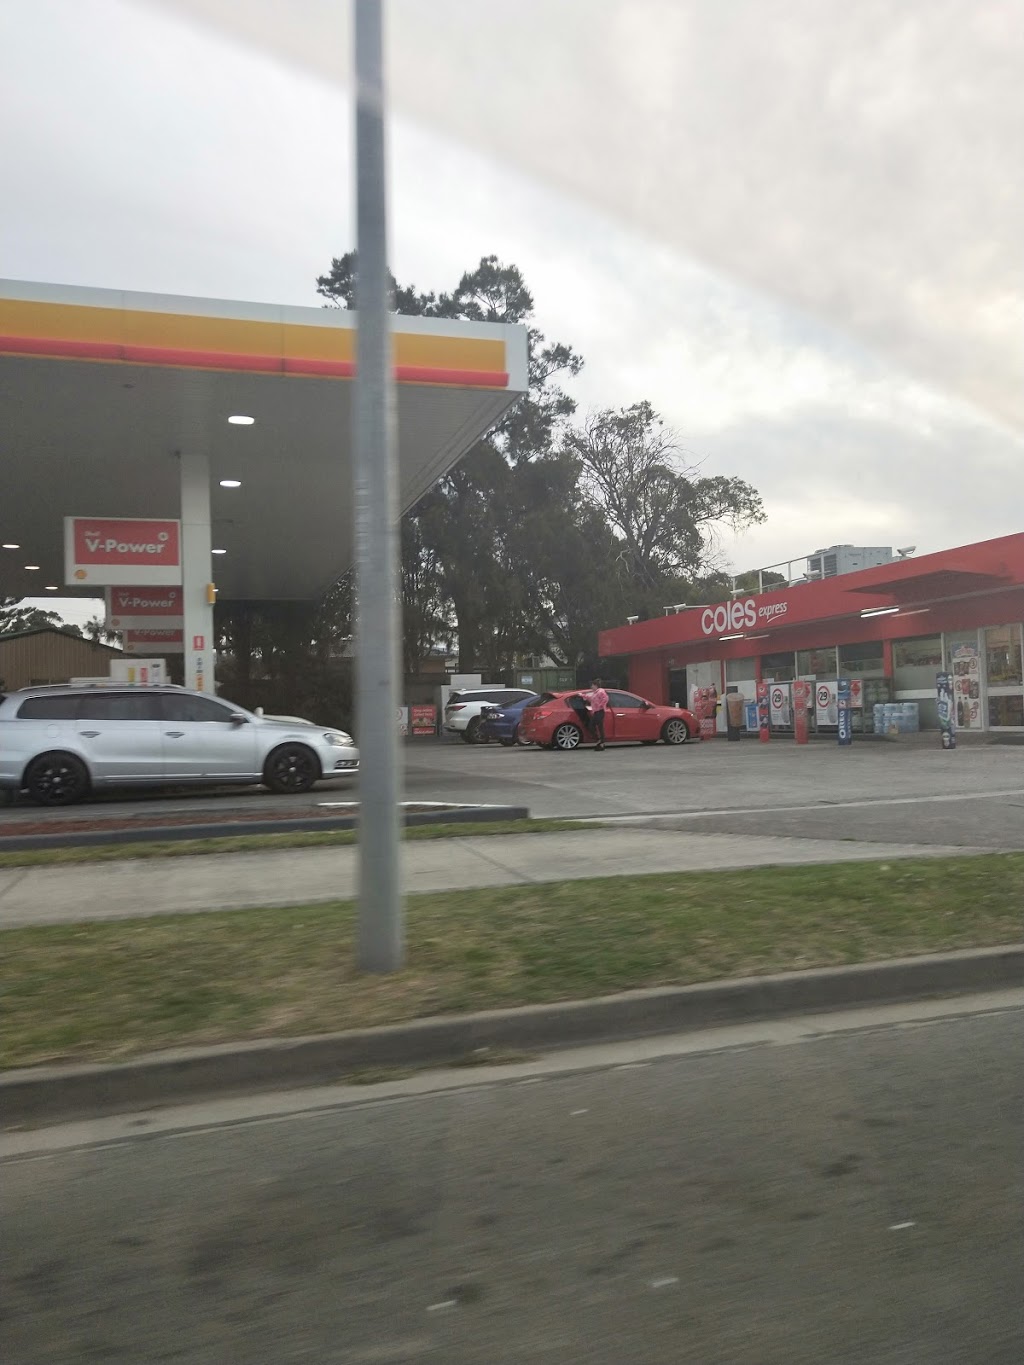 Coles Express | gas station | 252 Princes Hwy, Albion Park NSW 2527, Australia | 0242561309 OR +61 2 4256 1309